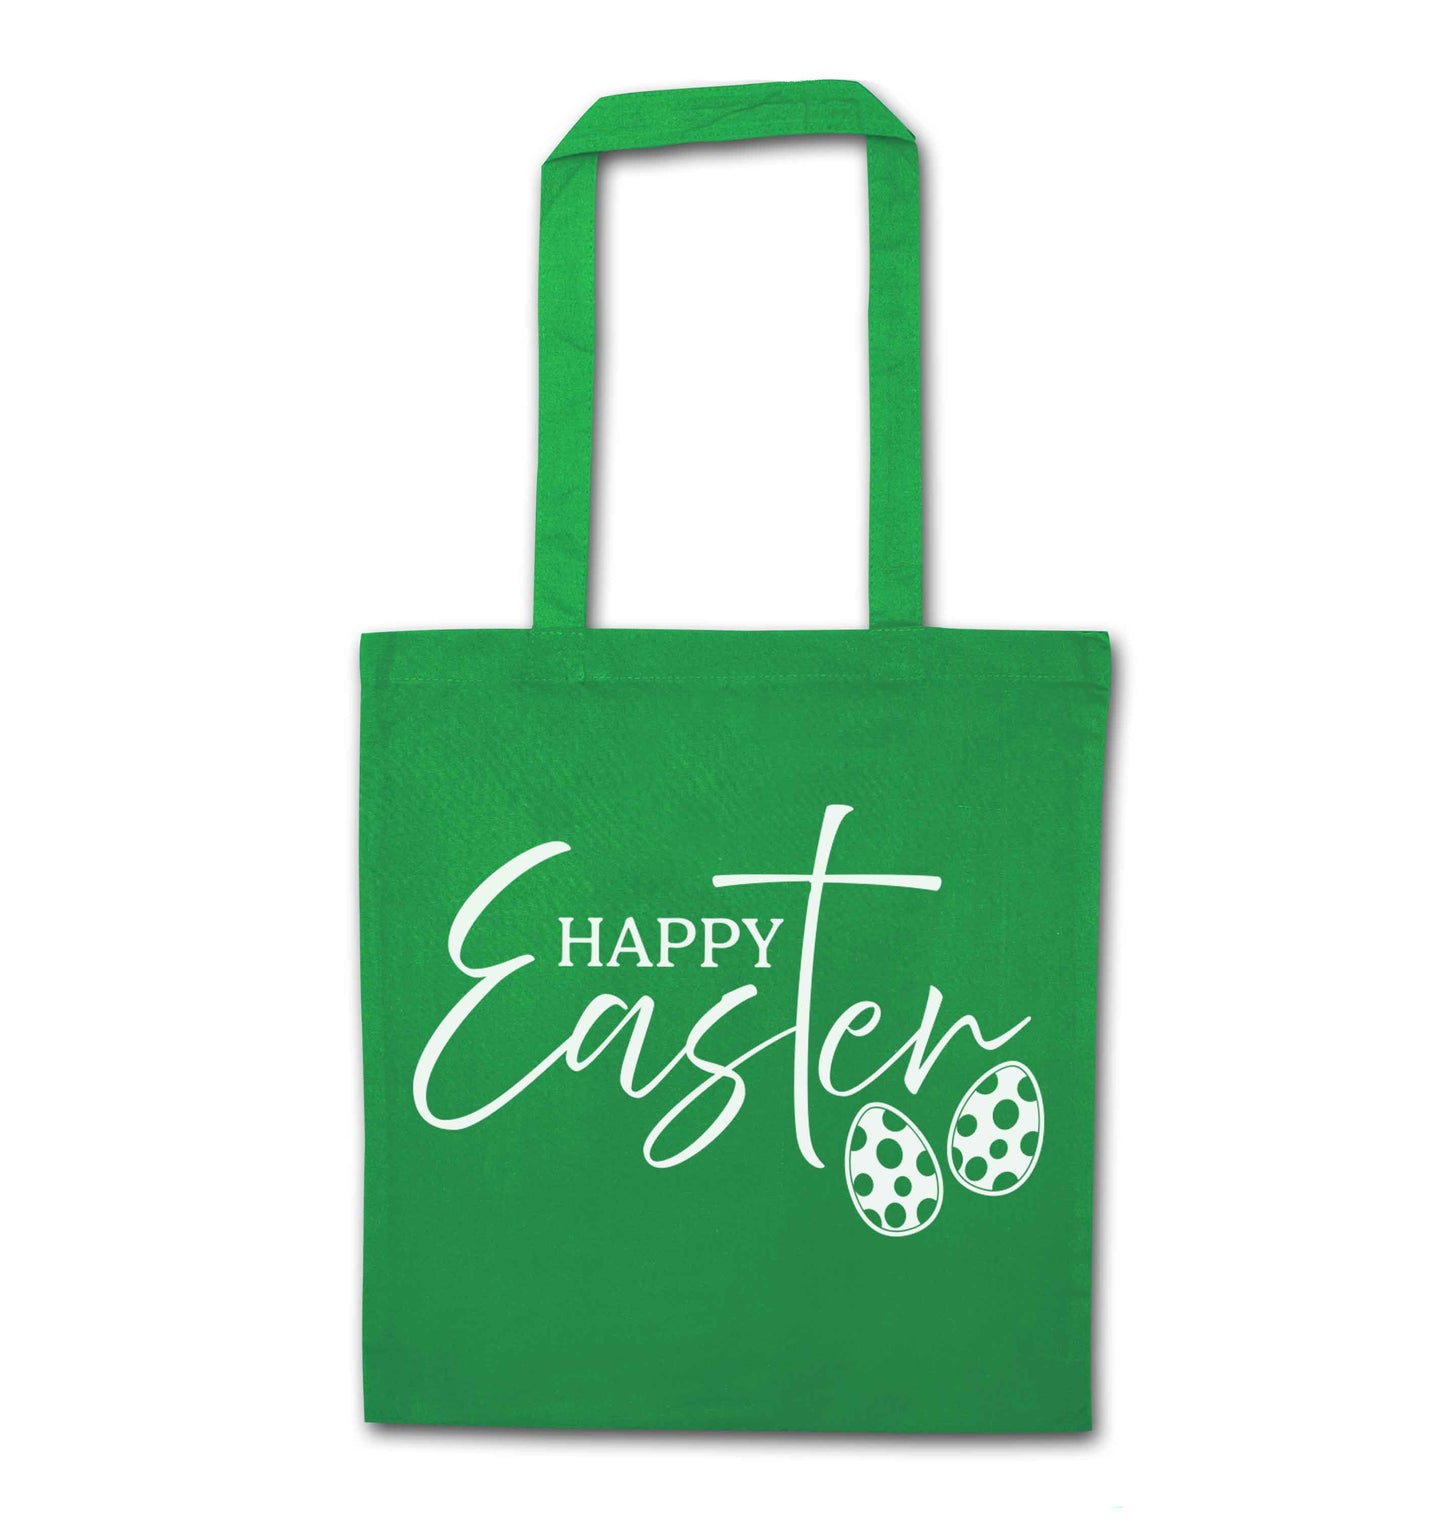 Happy Easter green tote bag